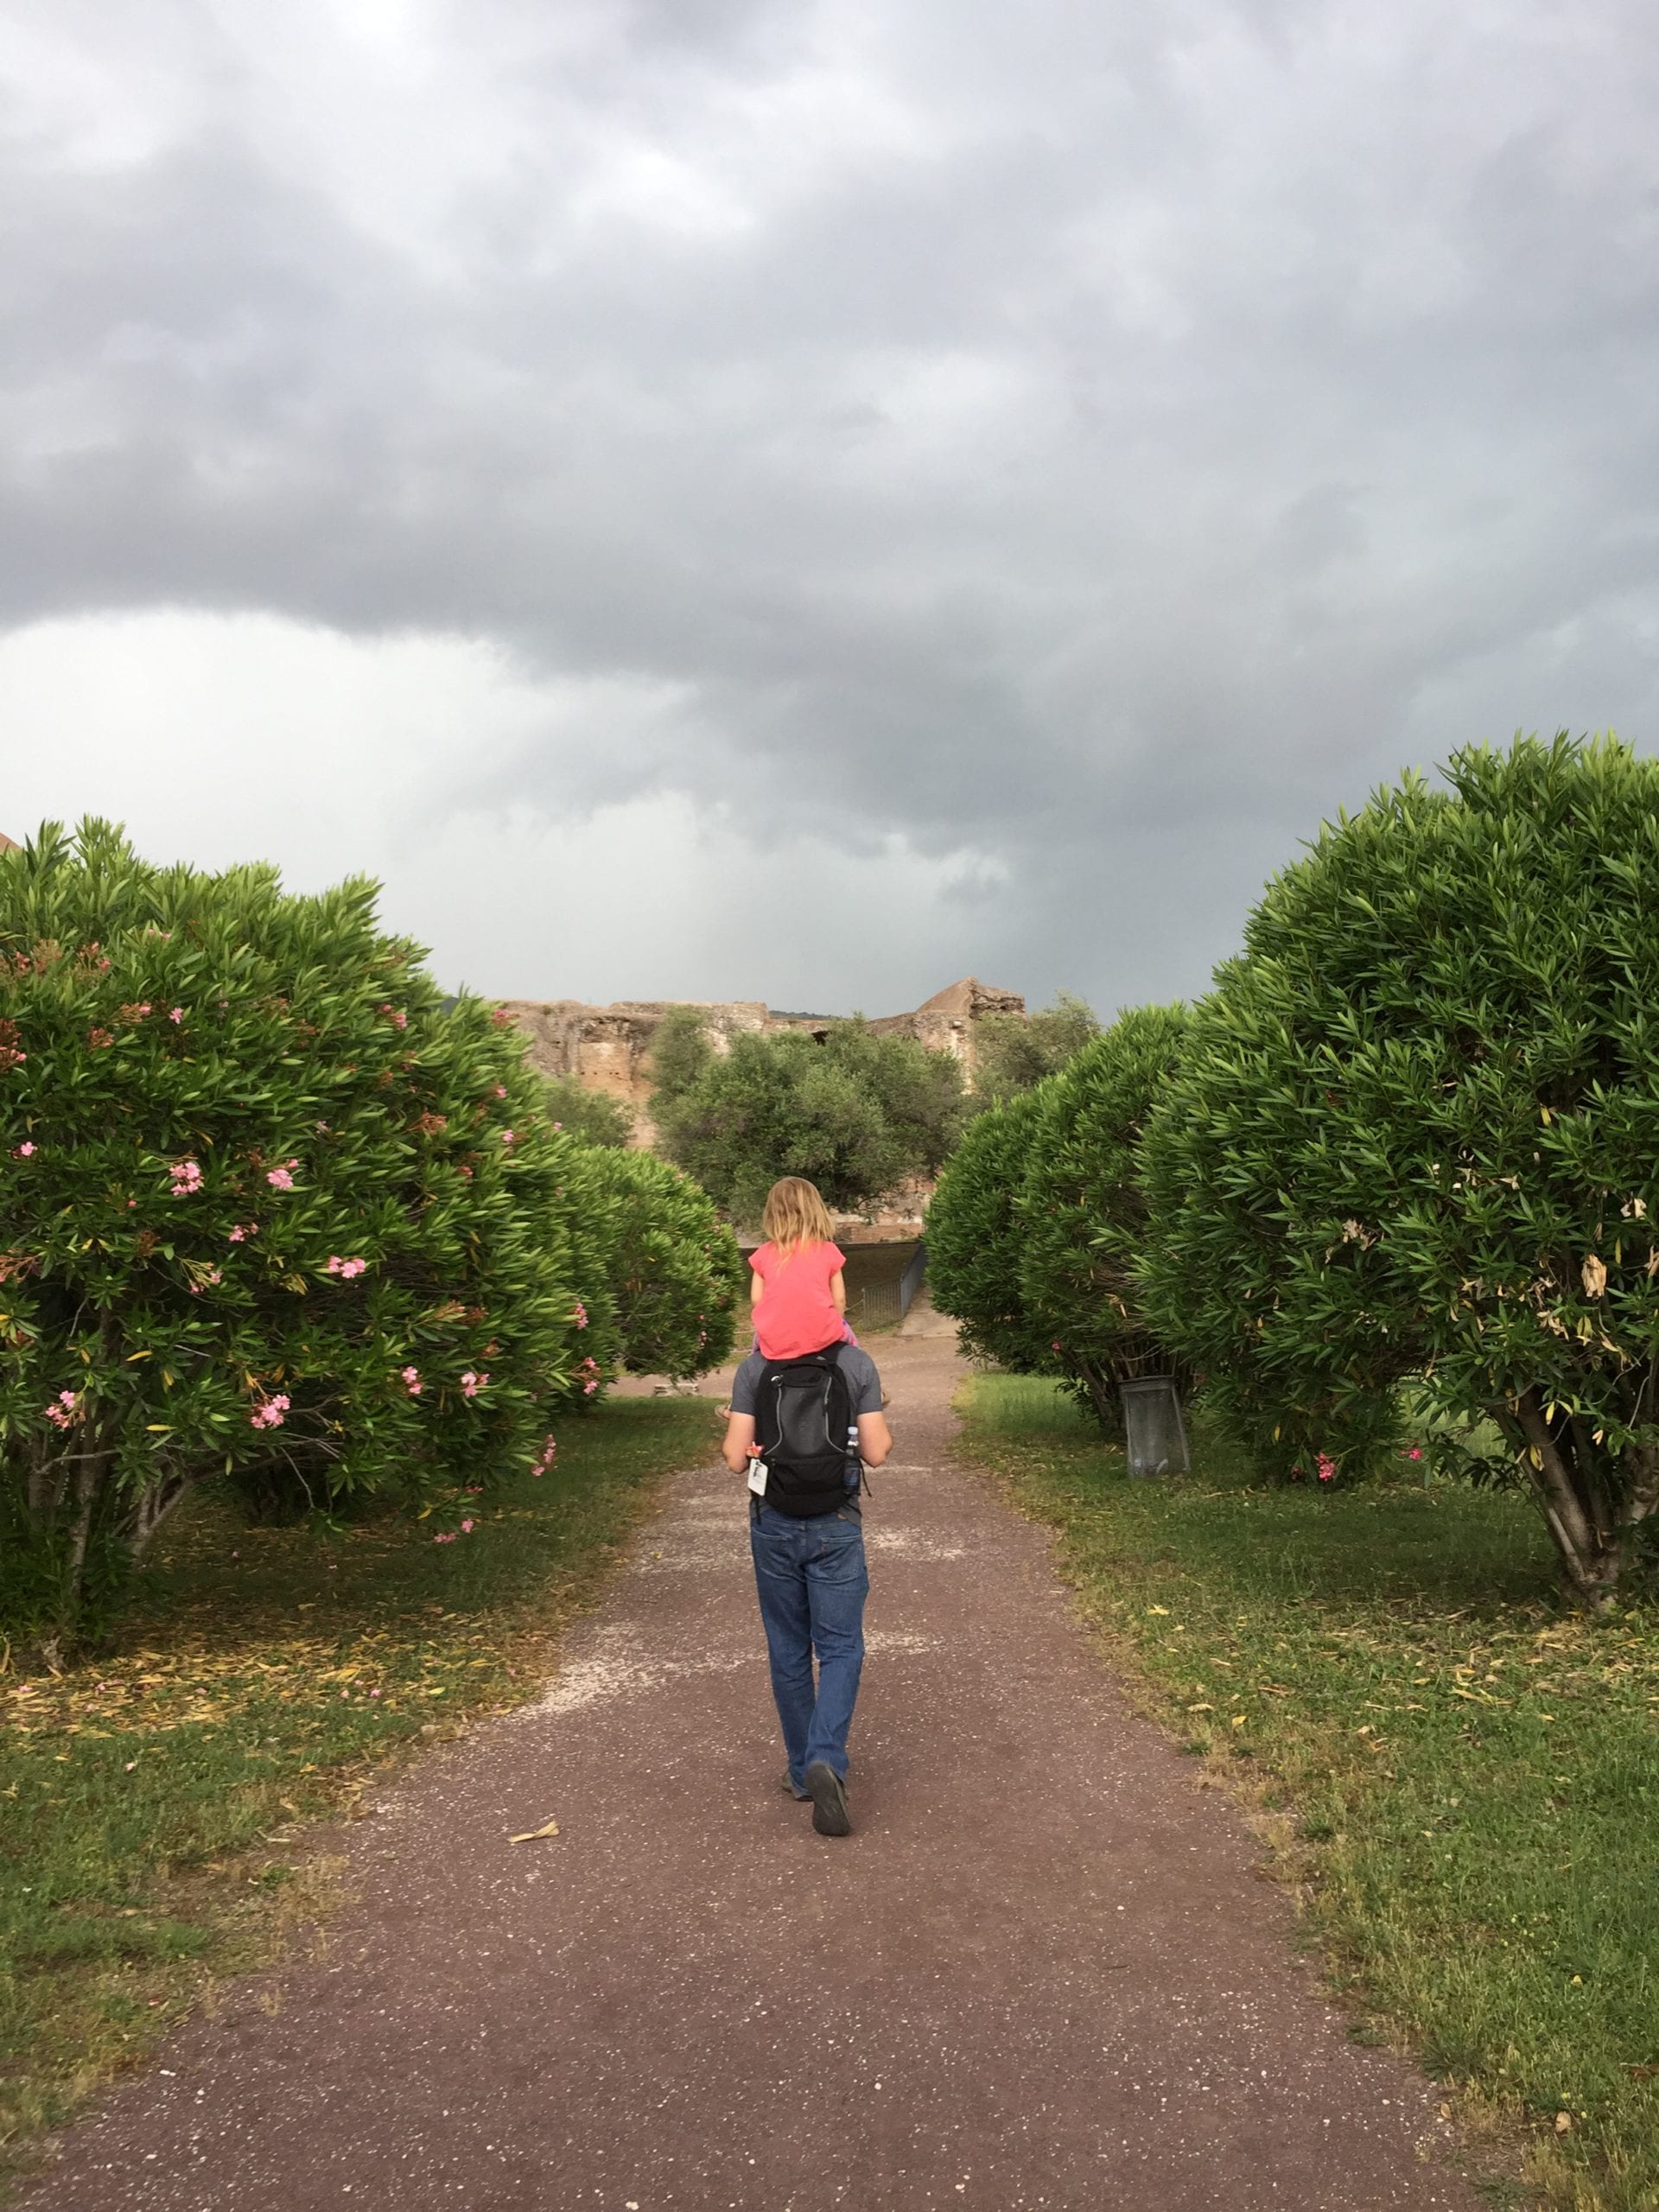 A young girl rides on her father's shoulder inside Hadrian's Villa near Rome, walking amongst the fruit trees.